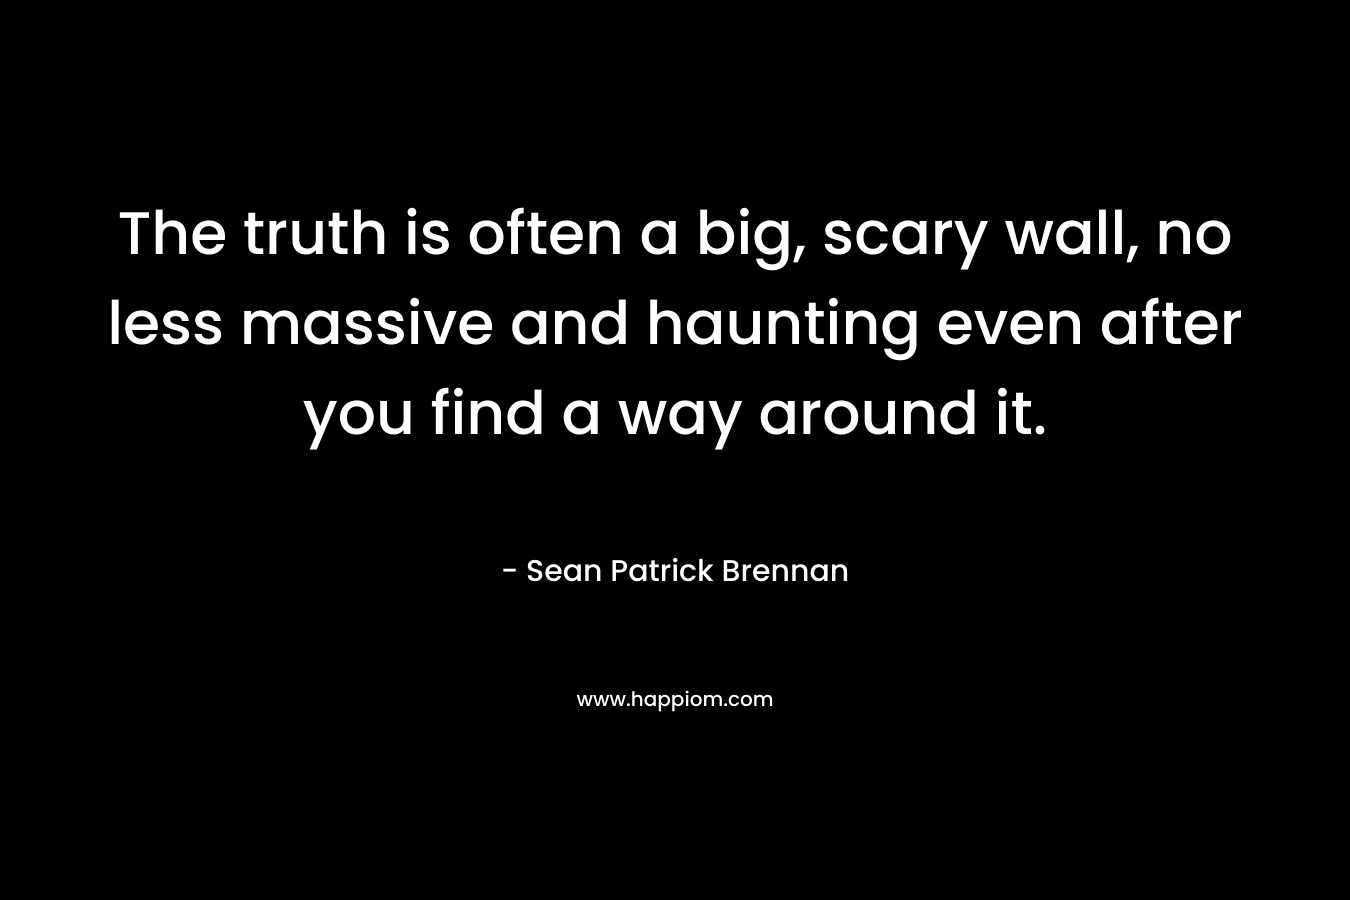 The truth is often a big, scary wall, no less massive and haunting even after you find a way around it. – Sean Patrick Brennan